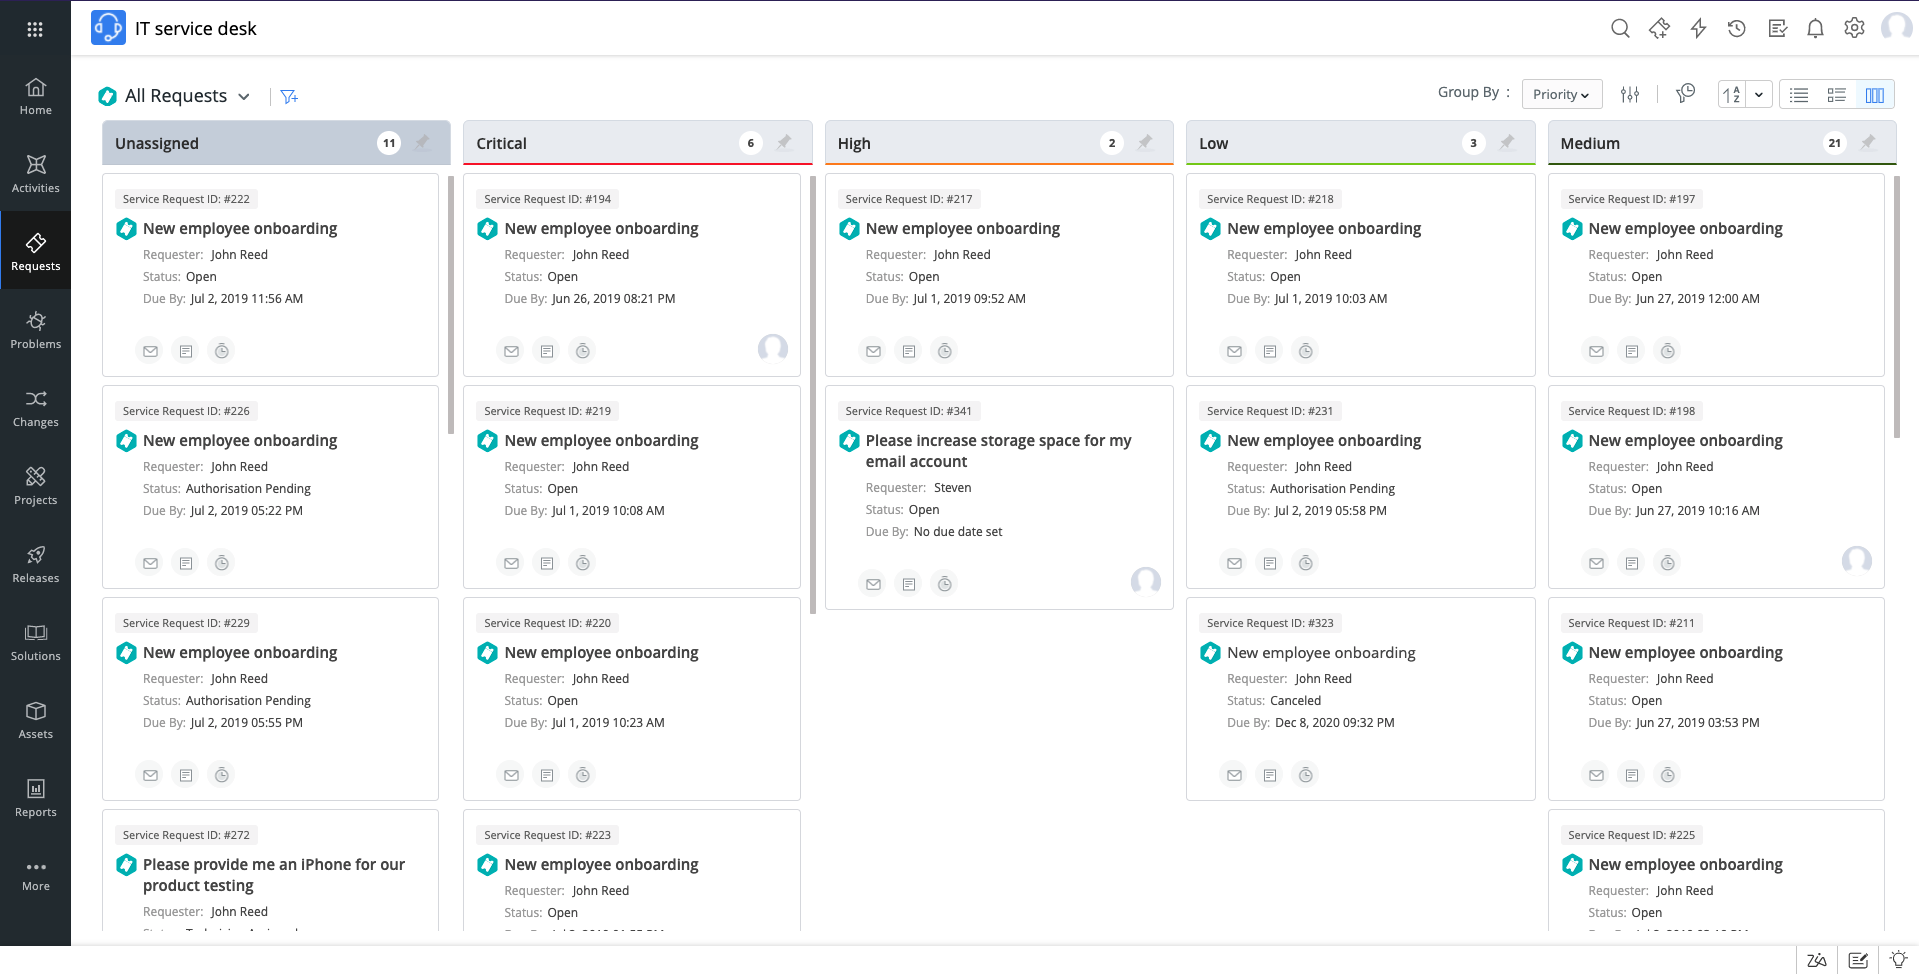 Manage your ticket queues more quickly and easily with the Kanban View, available in the all-new UI of ServiceDesk Plus Cloud.